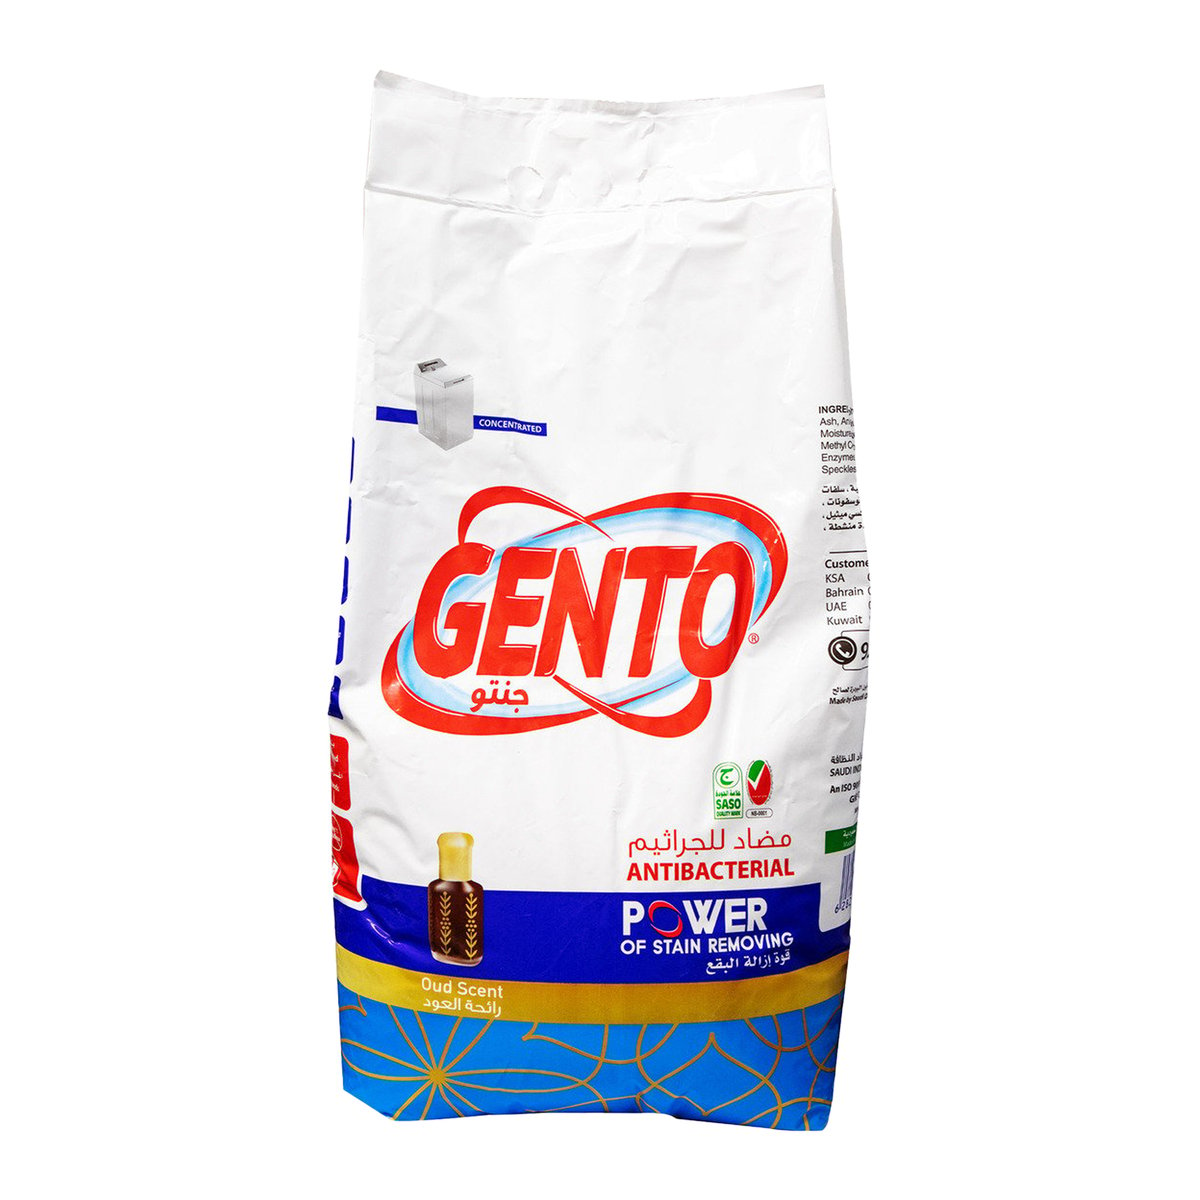 Gento Anti-Bacterial Washing Powder High Foam With Oud Scent 4.5 kg